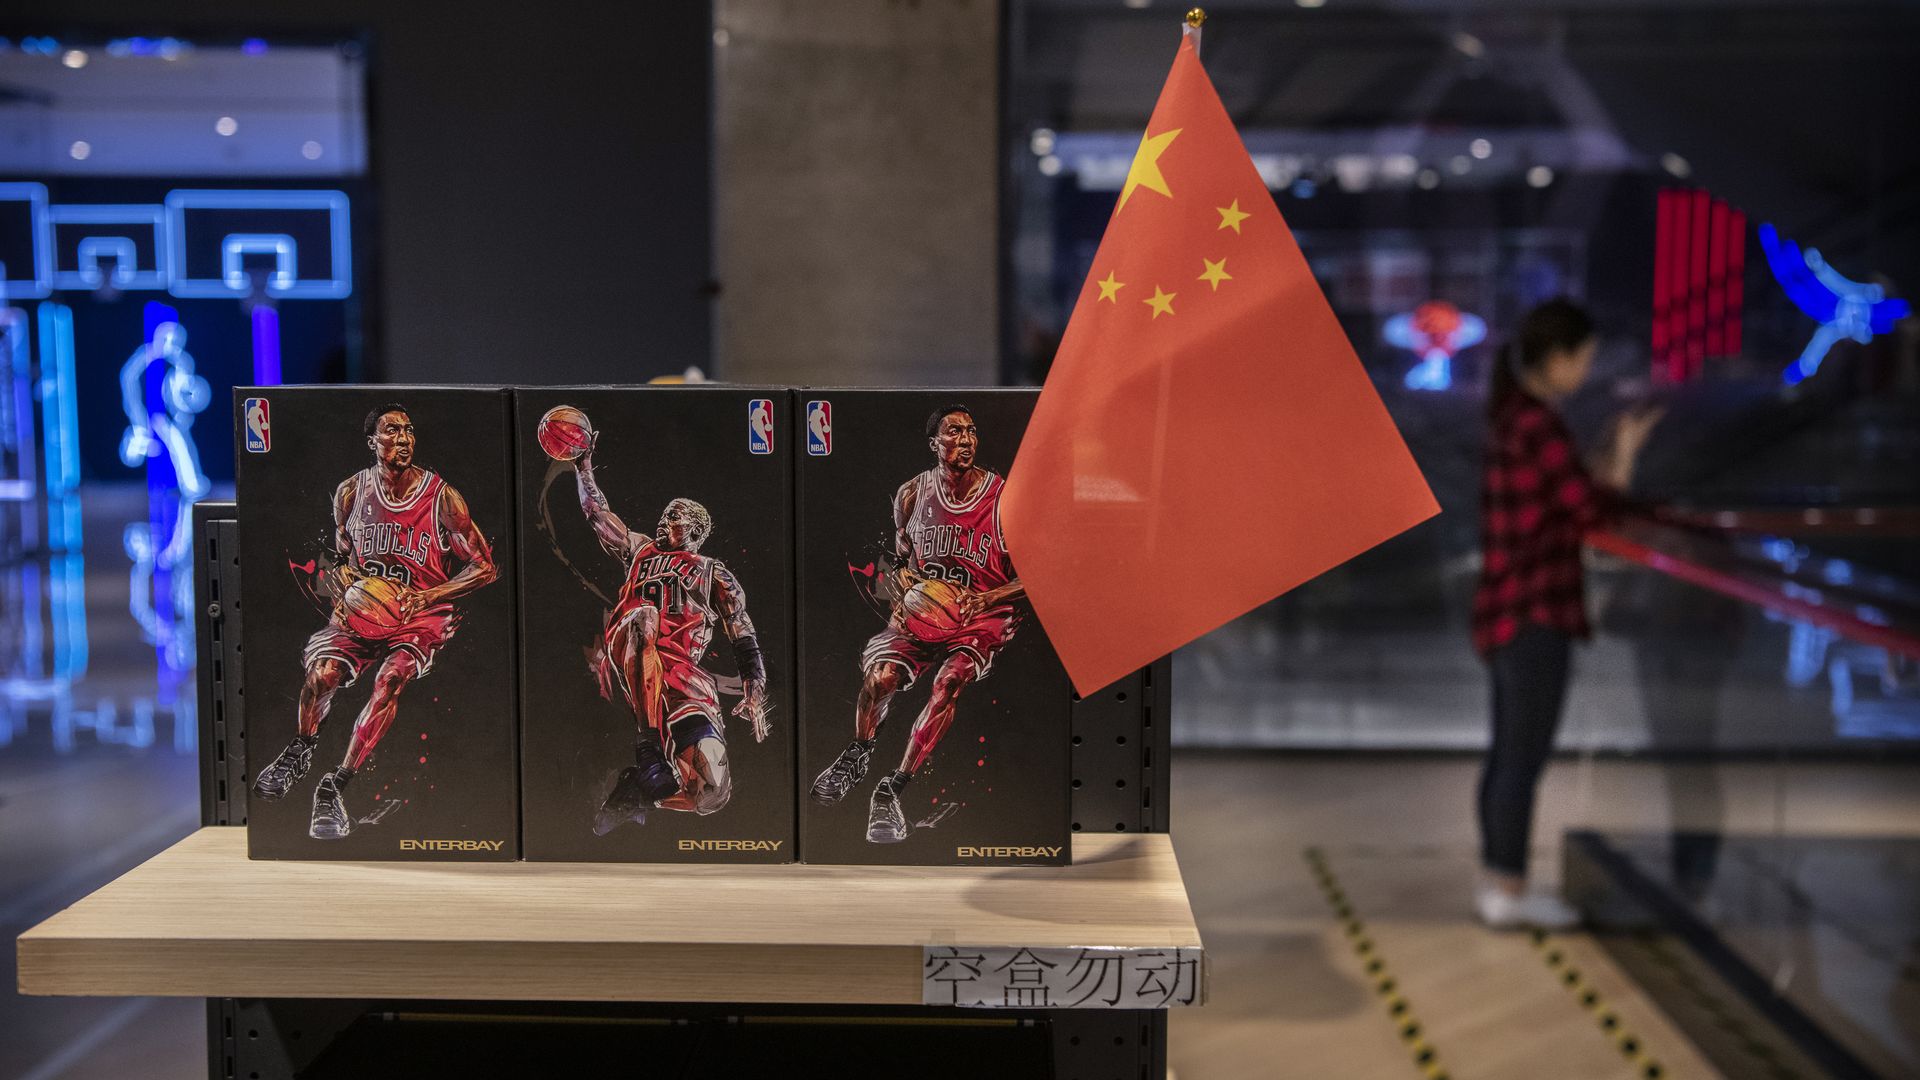 A Chinese flag is seen placed on merchandise in the NBA flagship retail store on October 9, 2019 in Beijing, China.A Chinese flag is seen